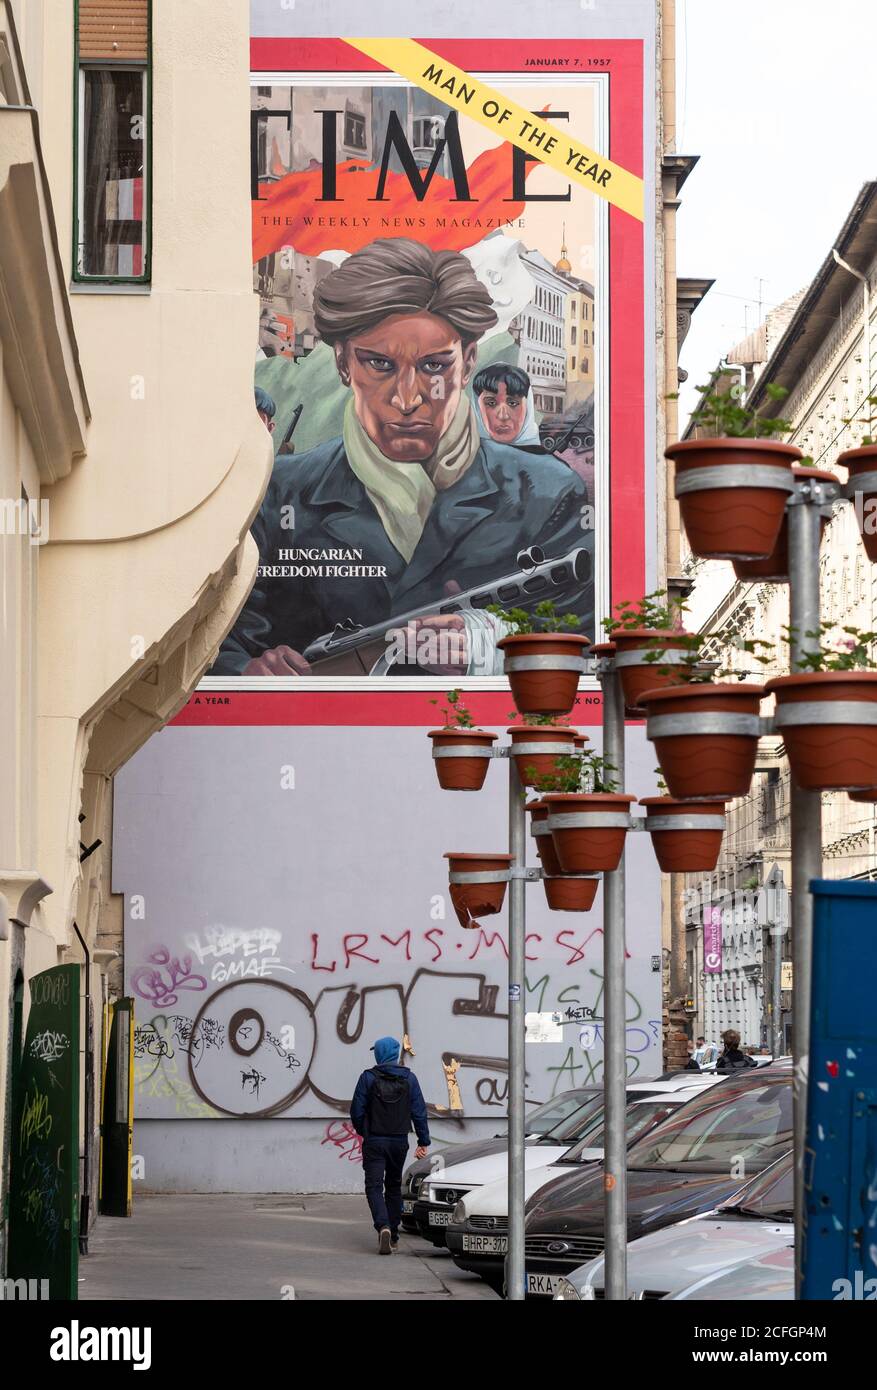 Time's Man of the year - Hungarian Freedom  Figher: A man walks toward a mural of the January 7th 1957 Time cover painted as a mural on a wall on a street in Pest. Stock Photo